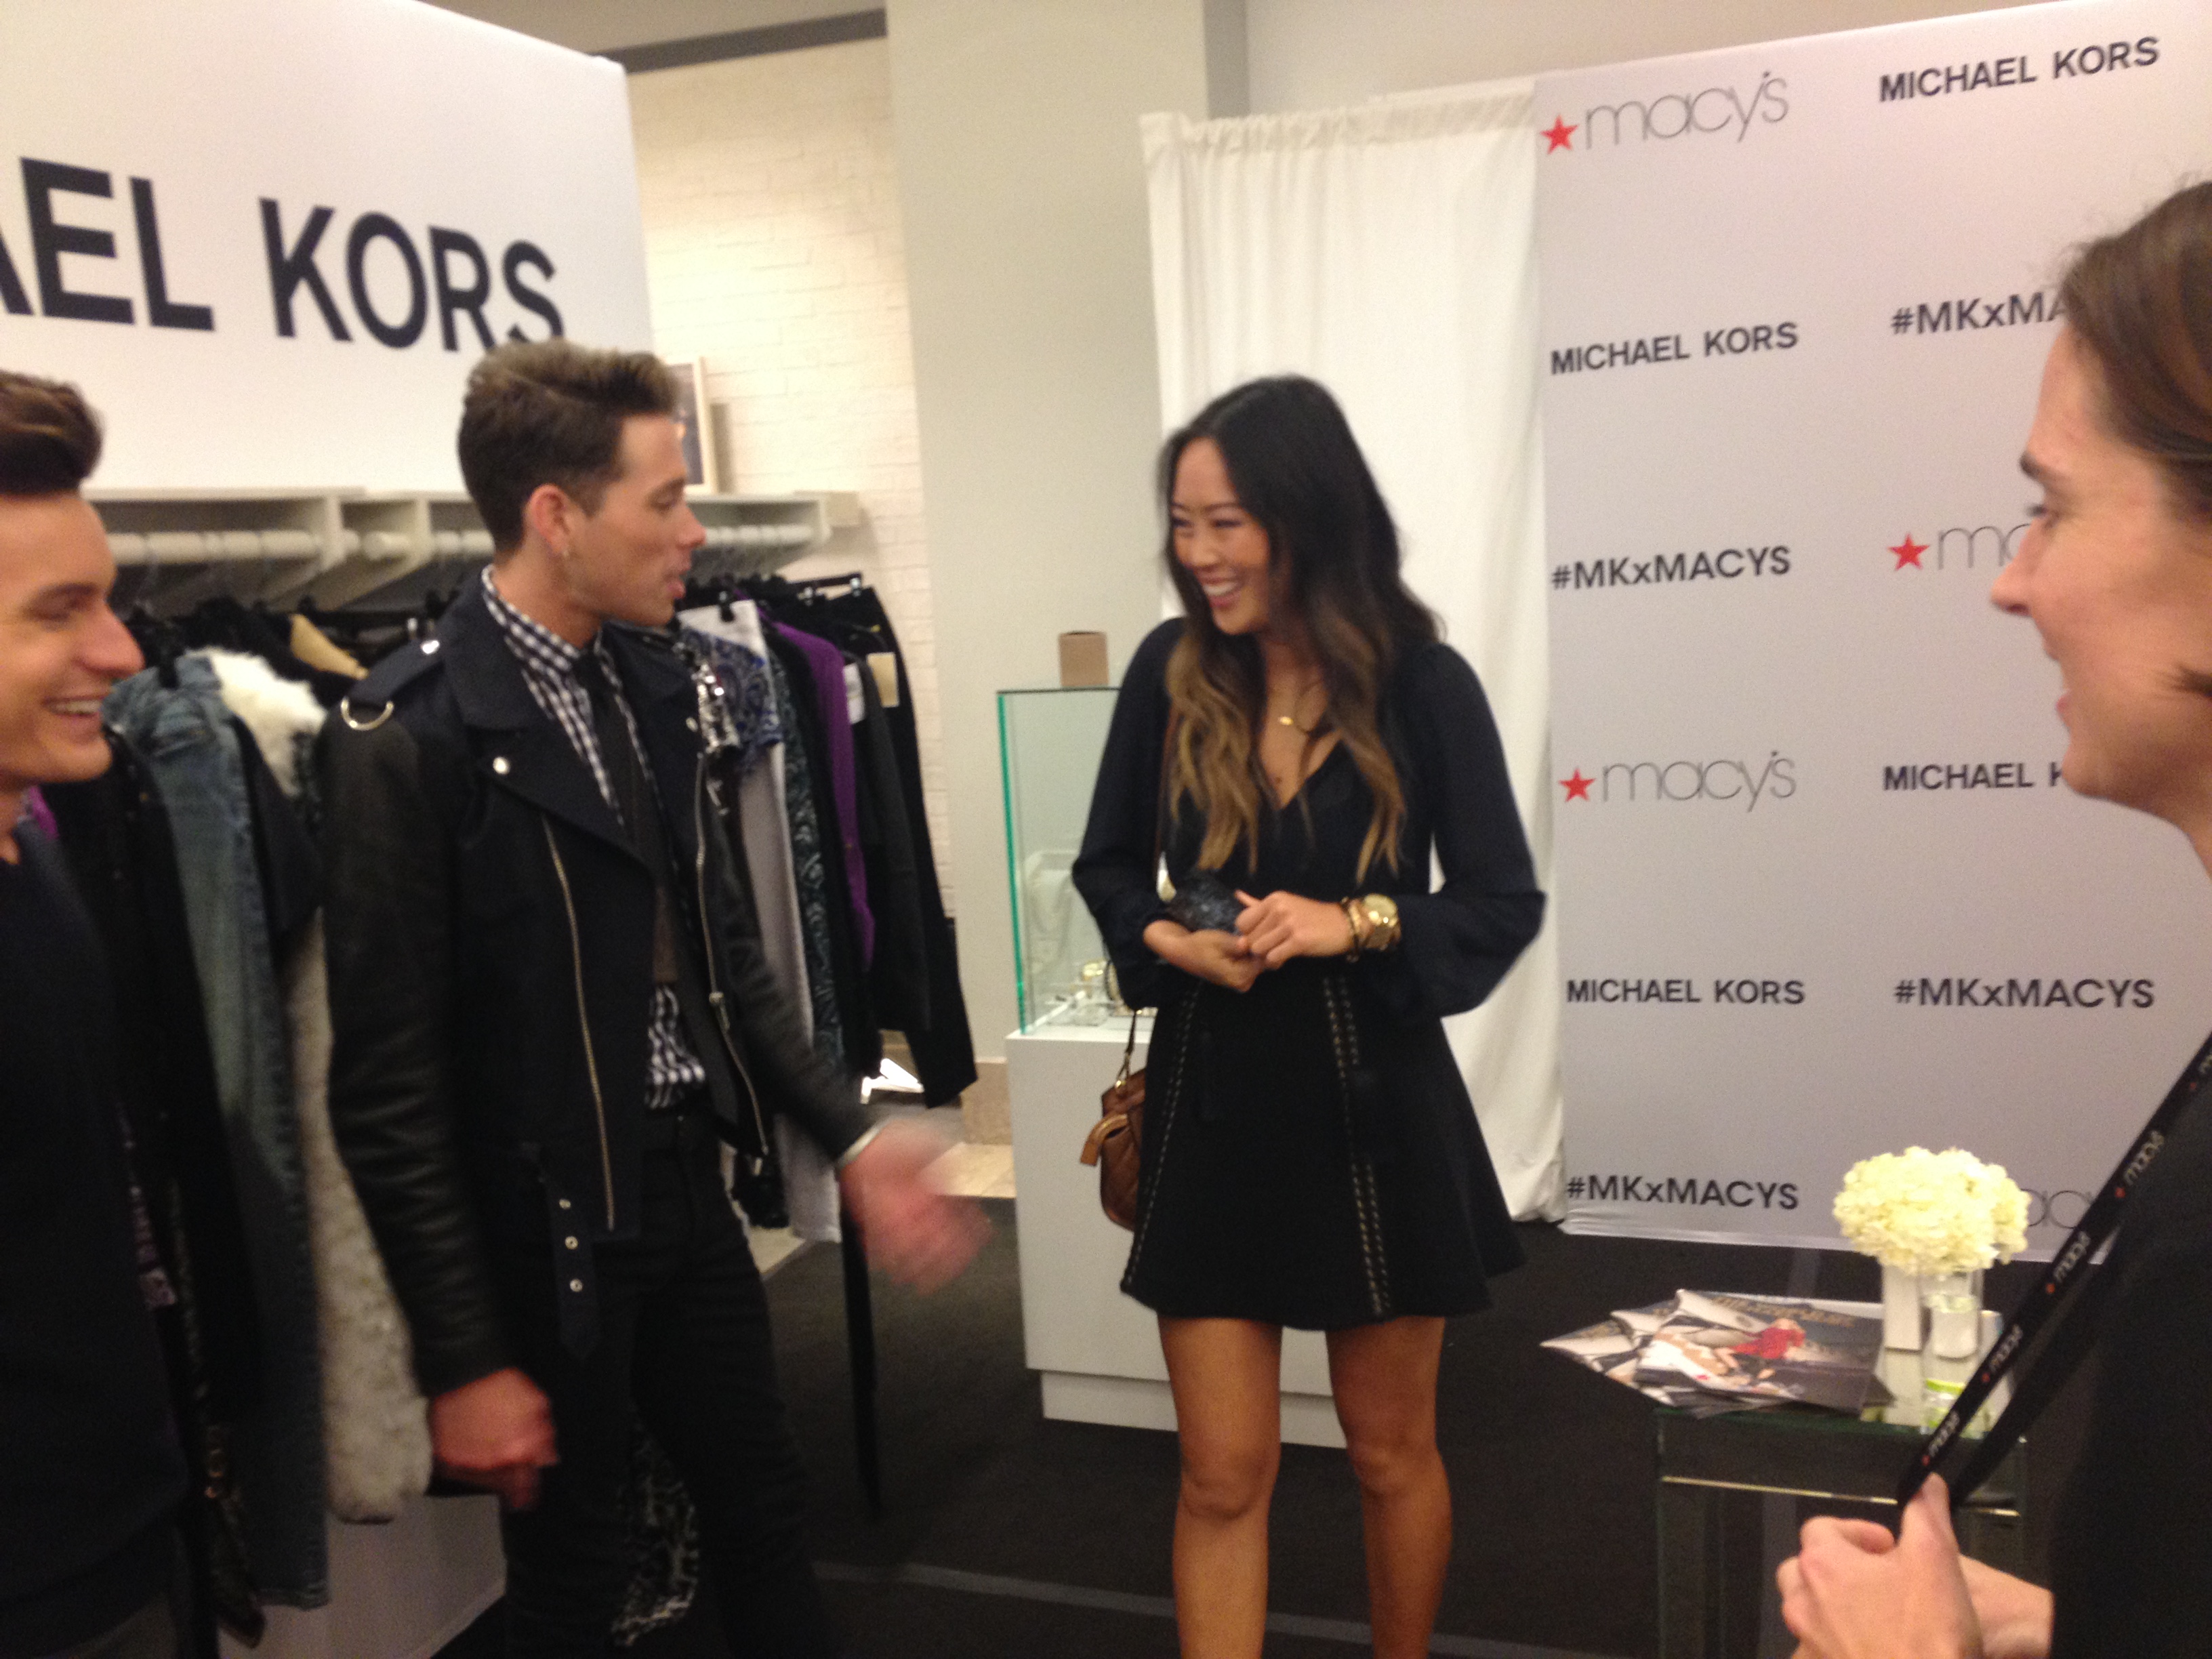 Some of team Michael Kors chatting with Aimee Song following the event. 